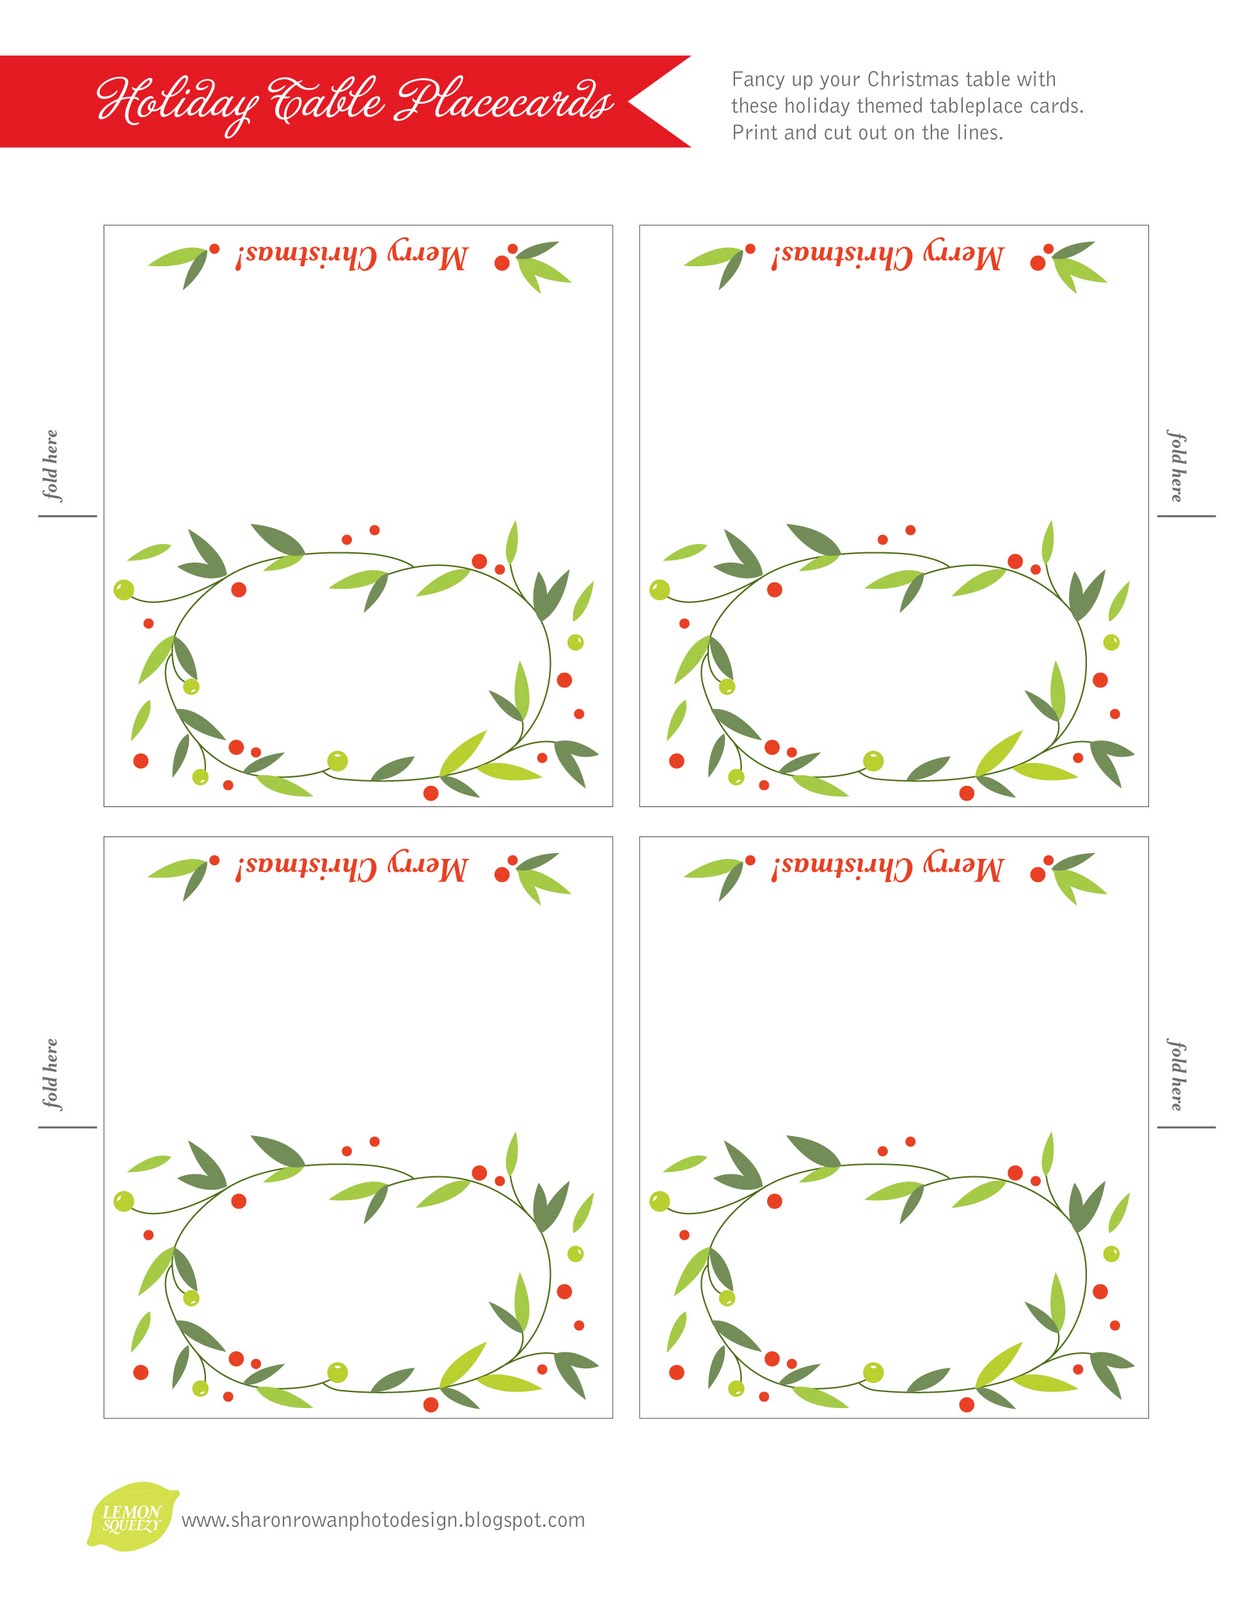 lemon-squeezy-day-12-place-cards